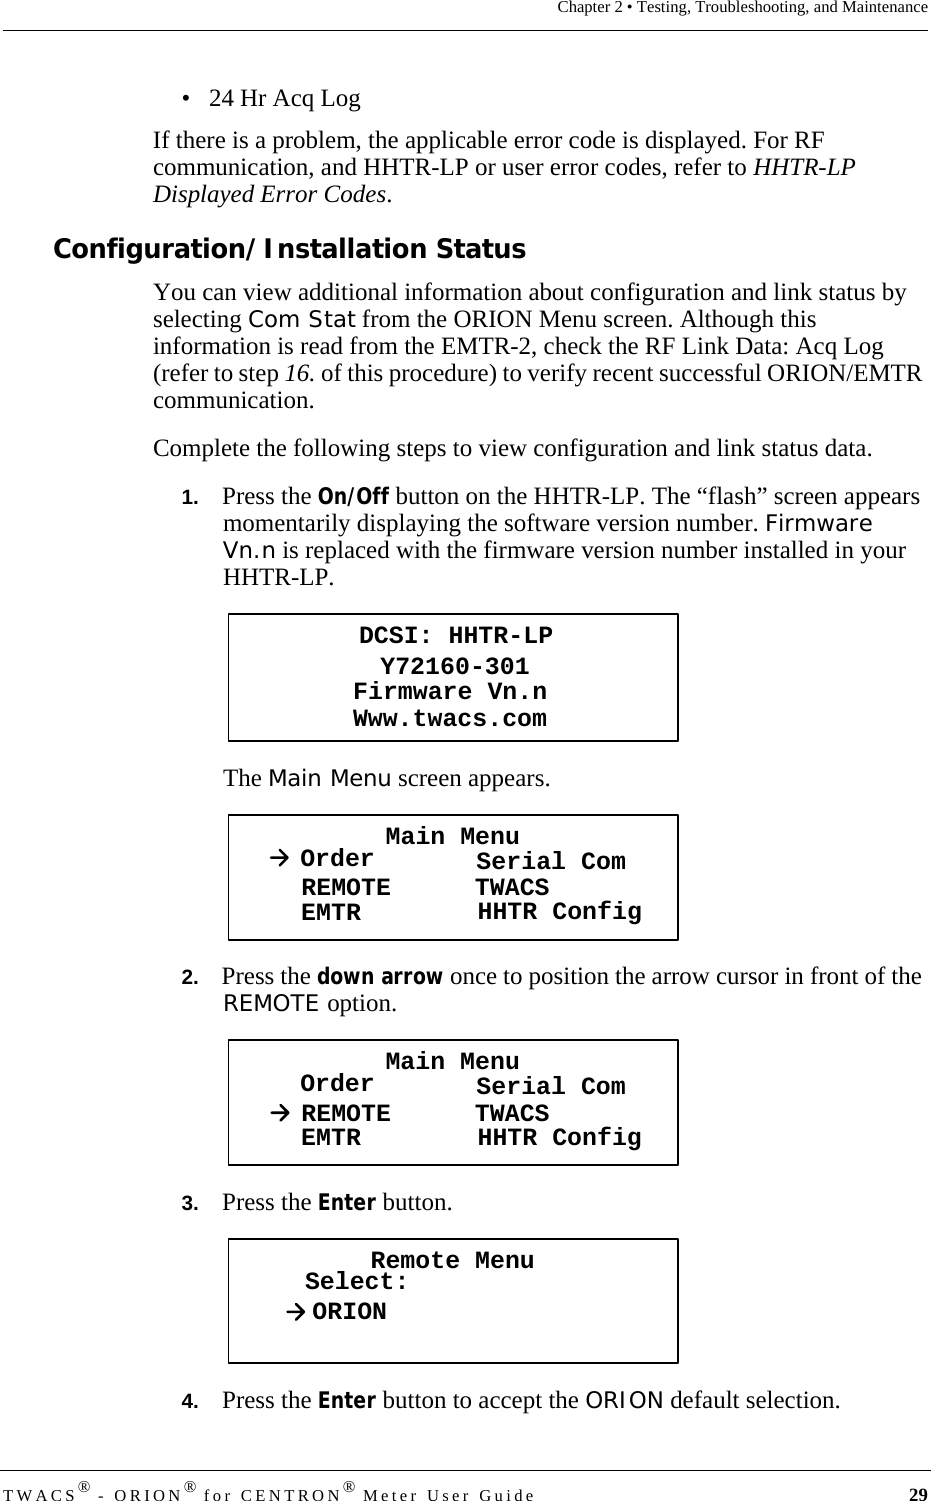 DRAFTTWACS® - ORION® for CENTRON® Meter User Guide 29Chapter 2 • Testing, Troubleshooting, and Maintenance• 24 Hr Acq LogIf there is a problem, the applicable error code is displayed. For RF communication, and HHTR-LP or user error codes, refer to HHTR-LP Displayed Error Codes. Configuration/Installation StatusYou can view additional information about configuration and link status by selecting Com Stat from the ORION Menu screen. Although this information is read from the EMTR-2, check the RF Link Data: Acq Log (refer to step 16. of this procedure) to verify recent successful ORION/EMTR communication. Complete the following steps to view configuration and link status data.1.   Press the On/Off button on the HHTR-LP. The “flash” screen appears momentarily displaying the software version number. Firmware Vn.n is replaced with the firmware version number installed in your HHTR-LP.The Main Menu screen appears.2.   Press the down arrow once to position the arrow cursor in front of the REMOTE option.3.   Press the Enter button. 4.   Press the Enter button to accept the ORION default selection.DCSI: HHTR-LPY72160-301Www.twacs.comFirmware Vn.nMain MenuOrder Serial ComREMOTEEMTR TWACSHHTR ConfigMain MenuOrder Serial ComREMOTEEMTR TWACSHHTR ConfigRemote MenuSelect:ORION